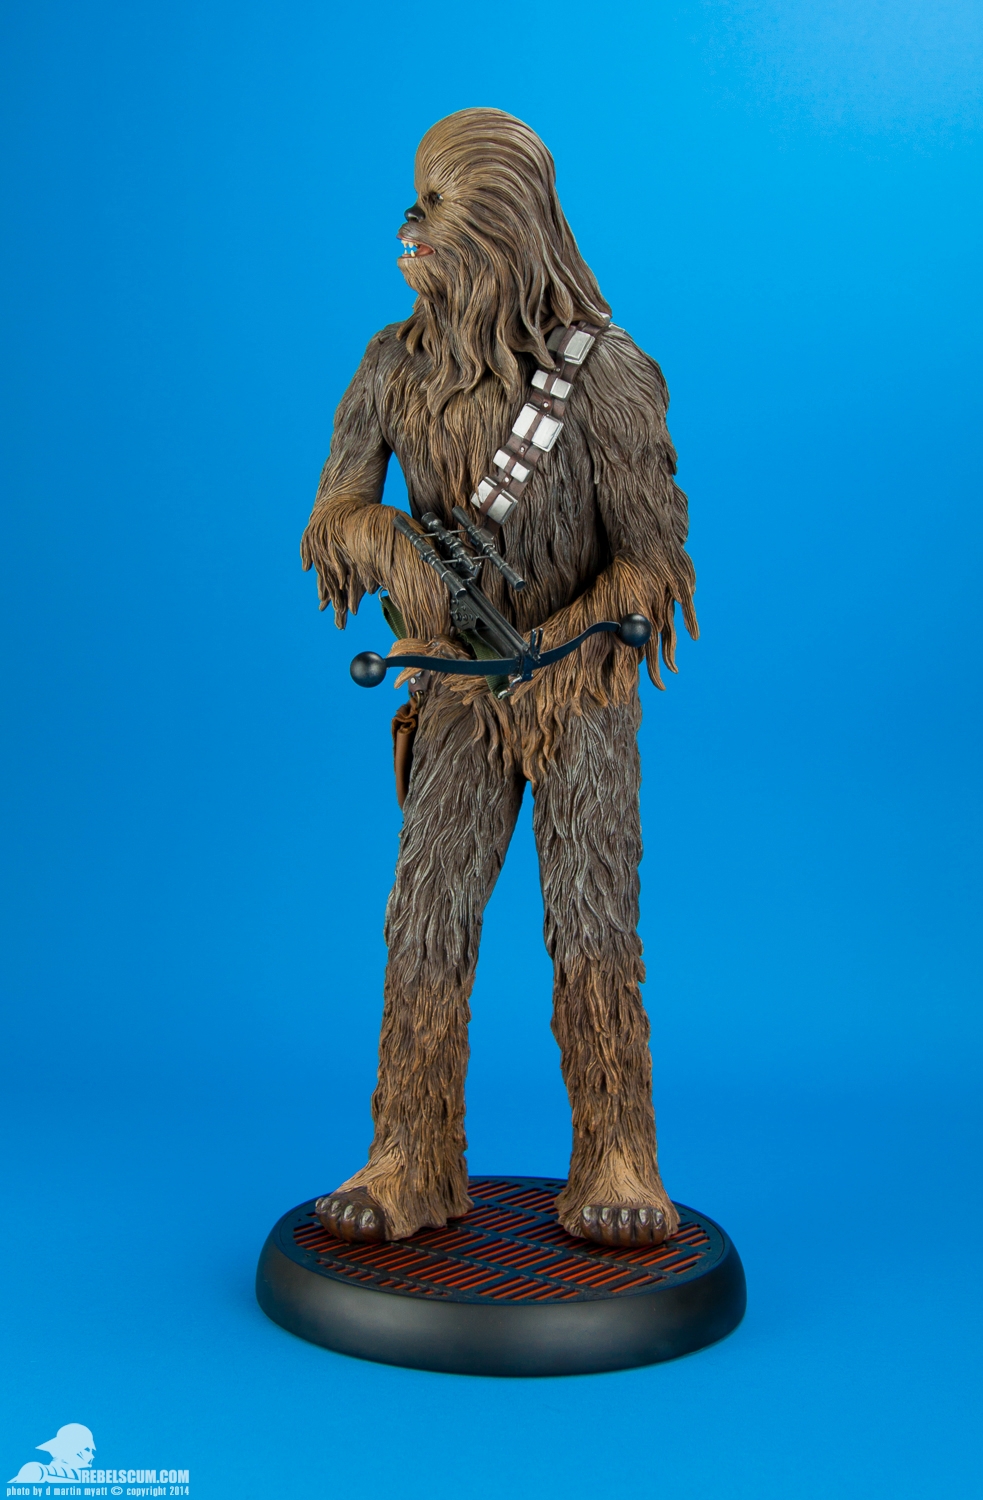 Chewbacca-Premium-Format-Figure-Sideshow-Collectibles-Exclusive-003.jpg